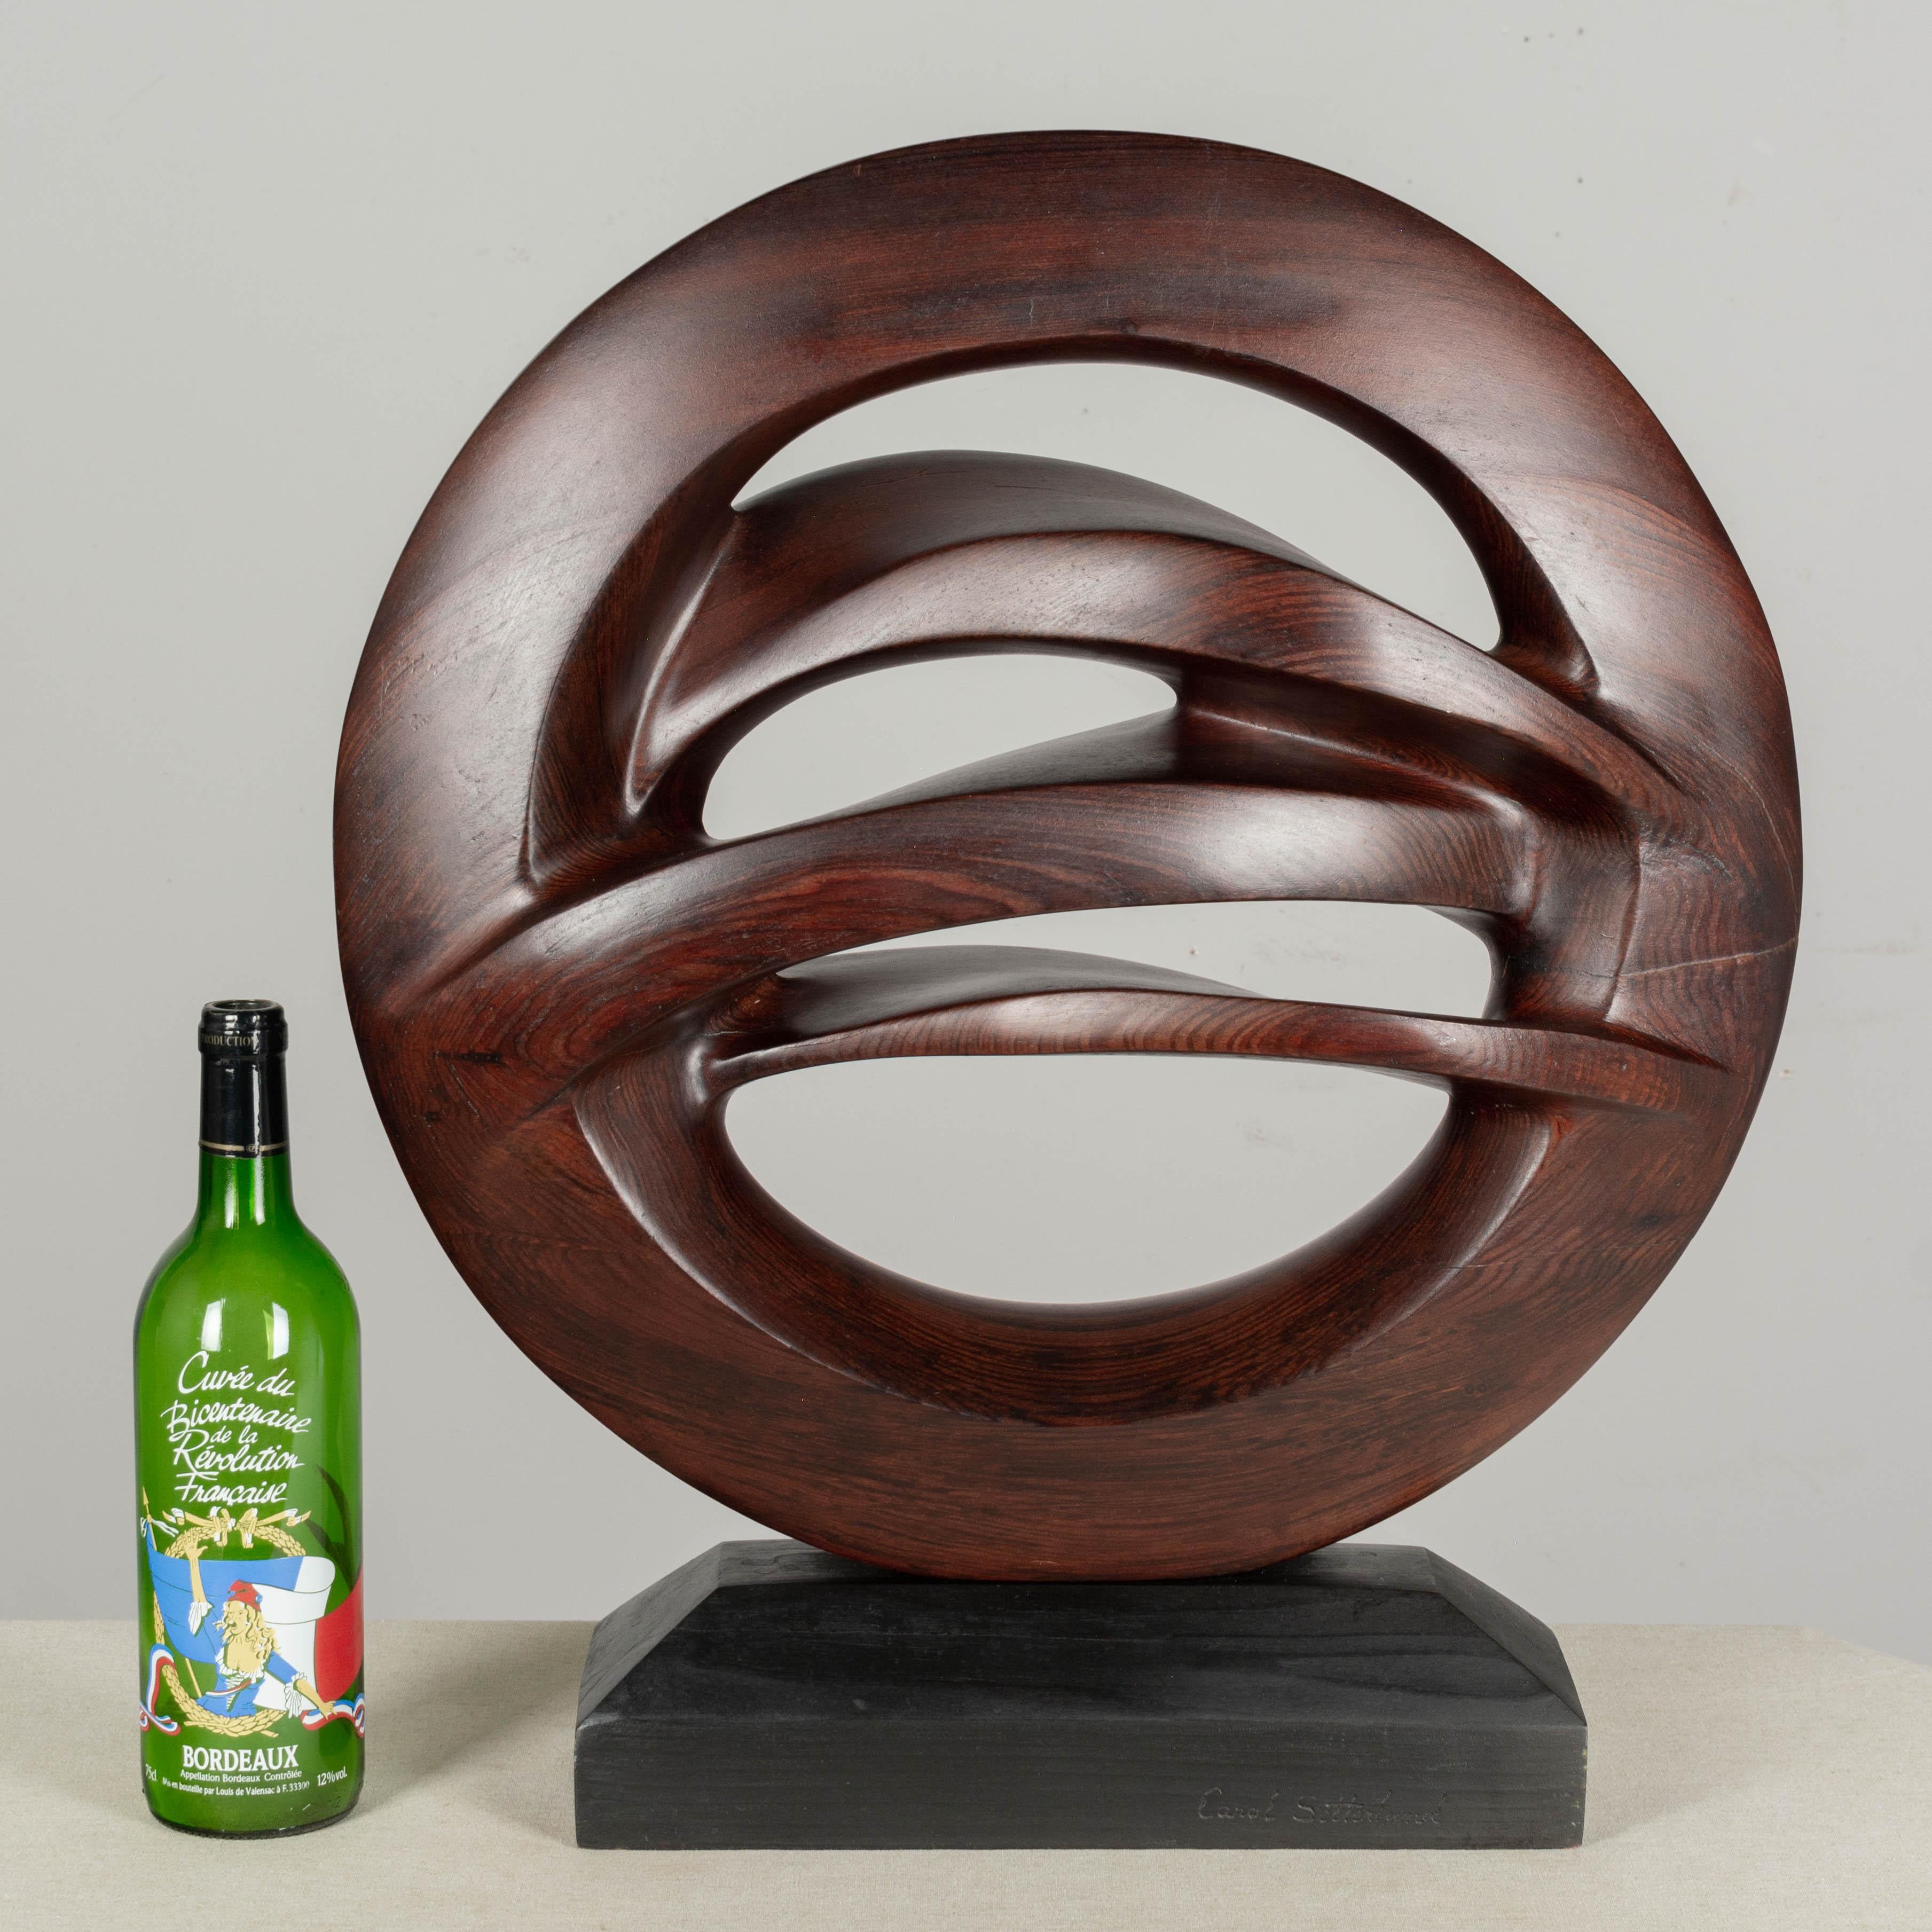 Abstract Wood Sculpture by Carol Setterlund 2